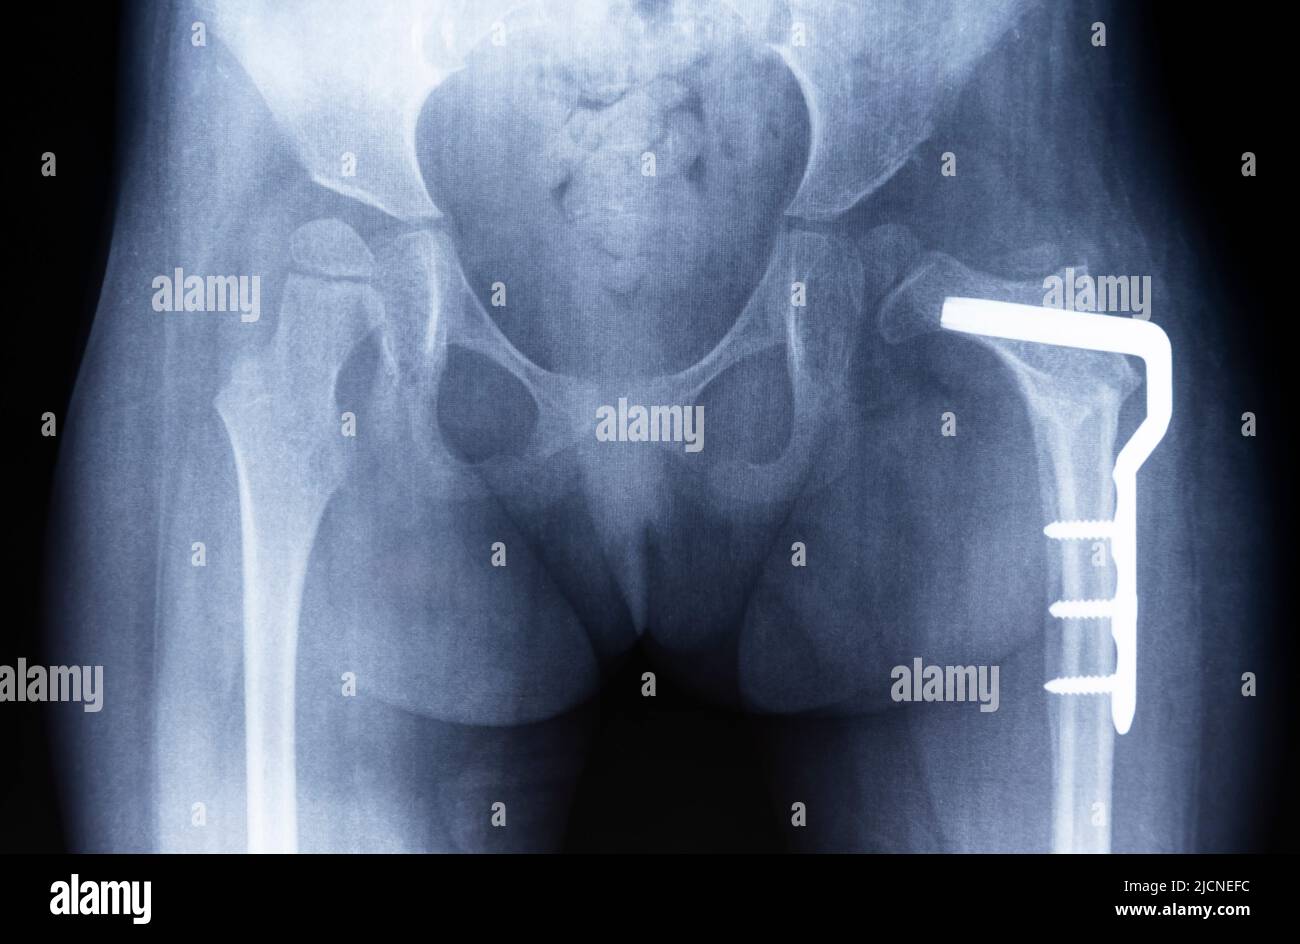 Osteotomy of the hip joint. Film radiograph of the pelvis shows dysplasia of the left thigh, metal plate. Stock Photo